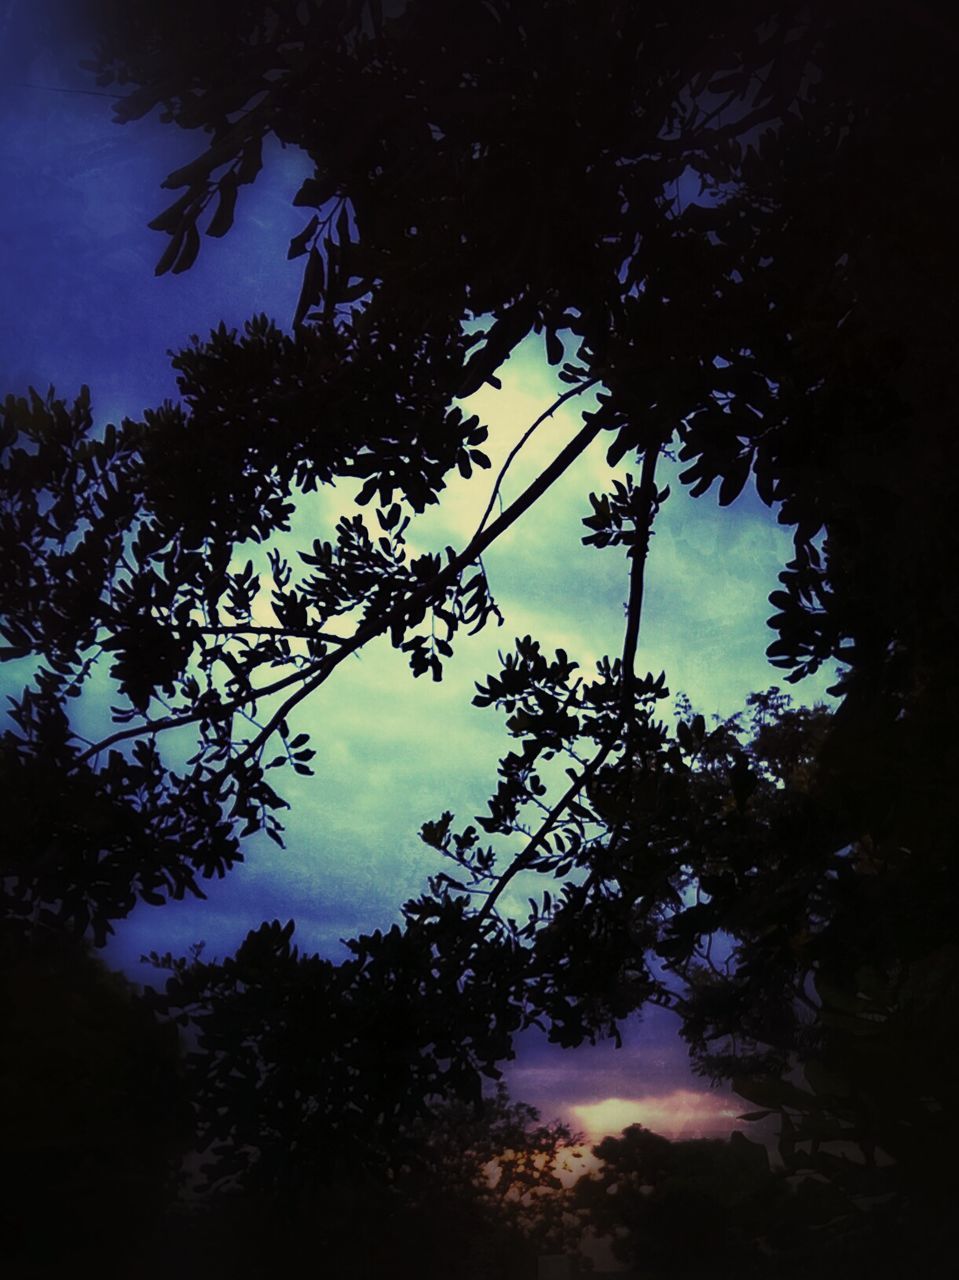 SILHOUETTE OF TREES AGAINST SKY